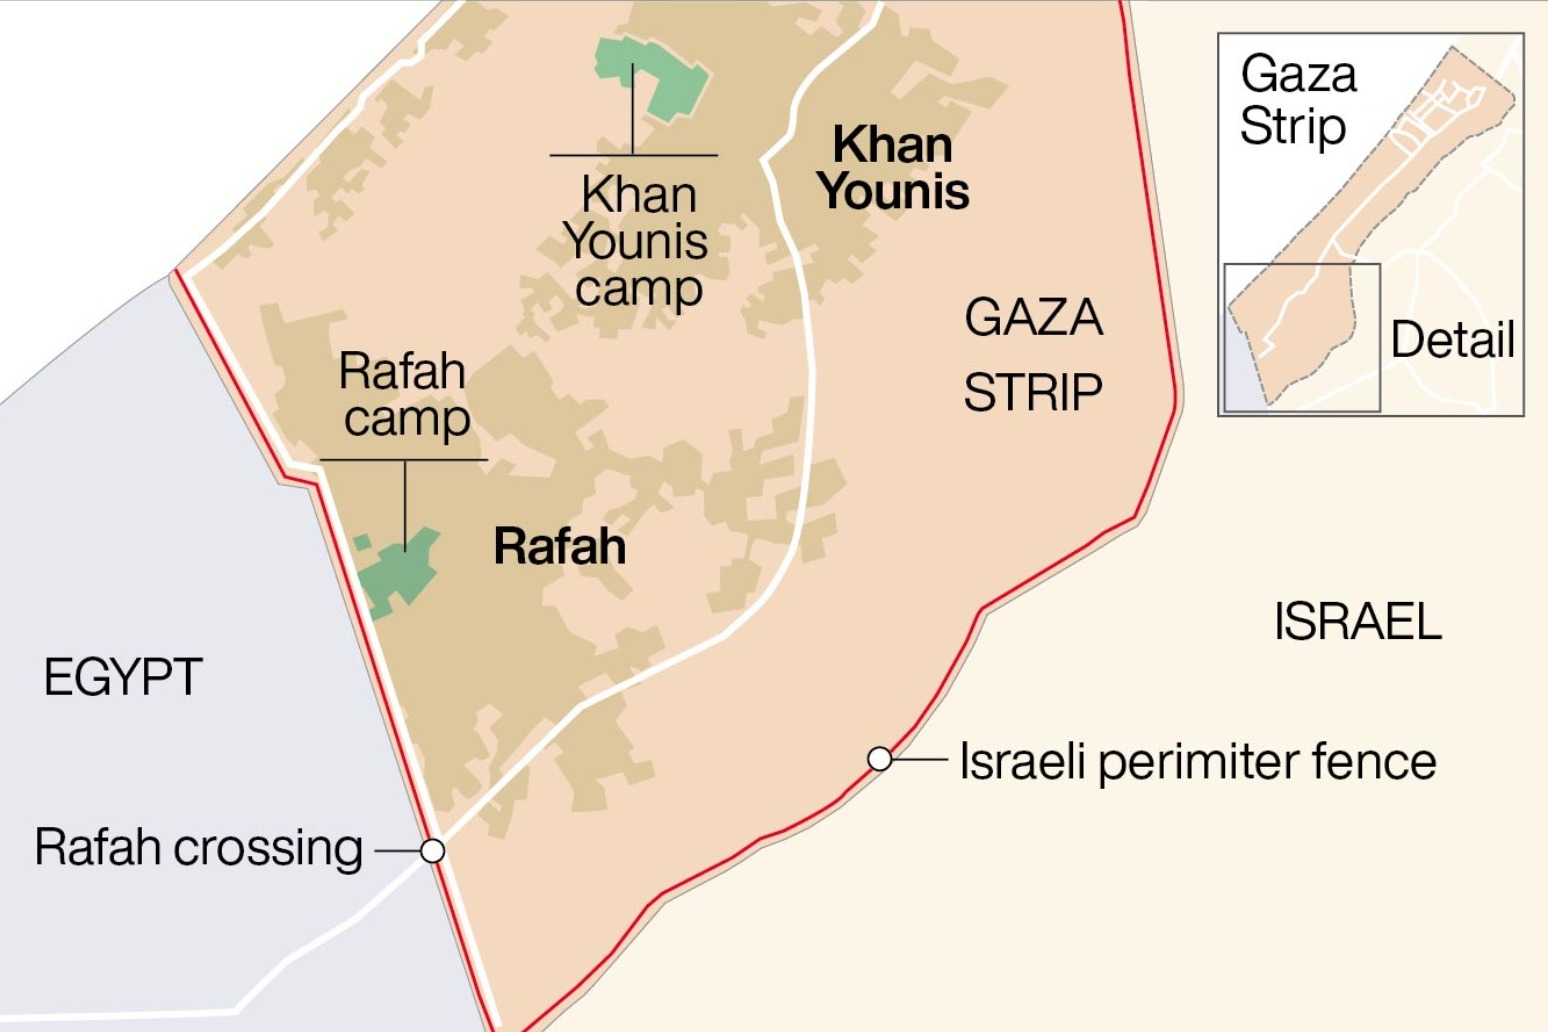 UN Israel prevented access to Rafah crossing